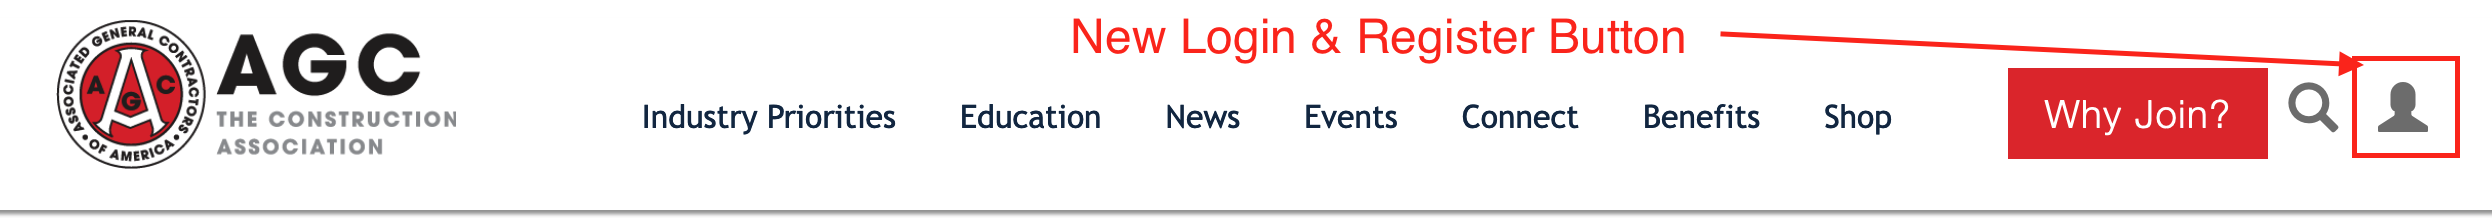 Screenshot of the header with the new location of login and register actions.